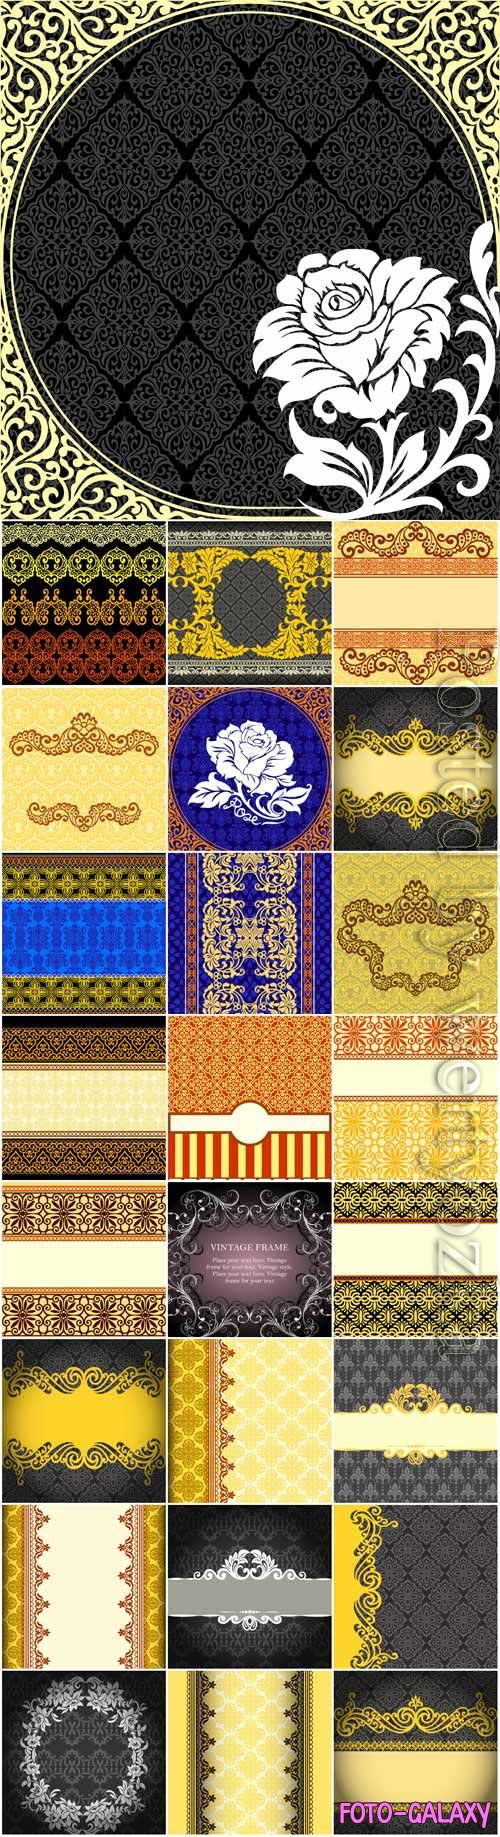 Backgrounds with borders, patterns and ornaments in vector